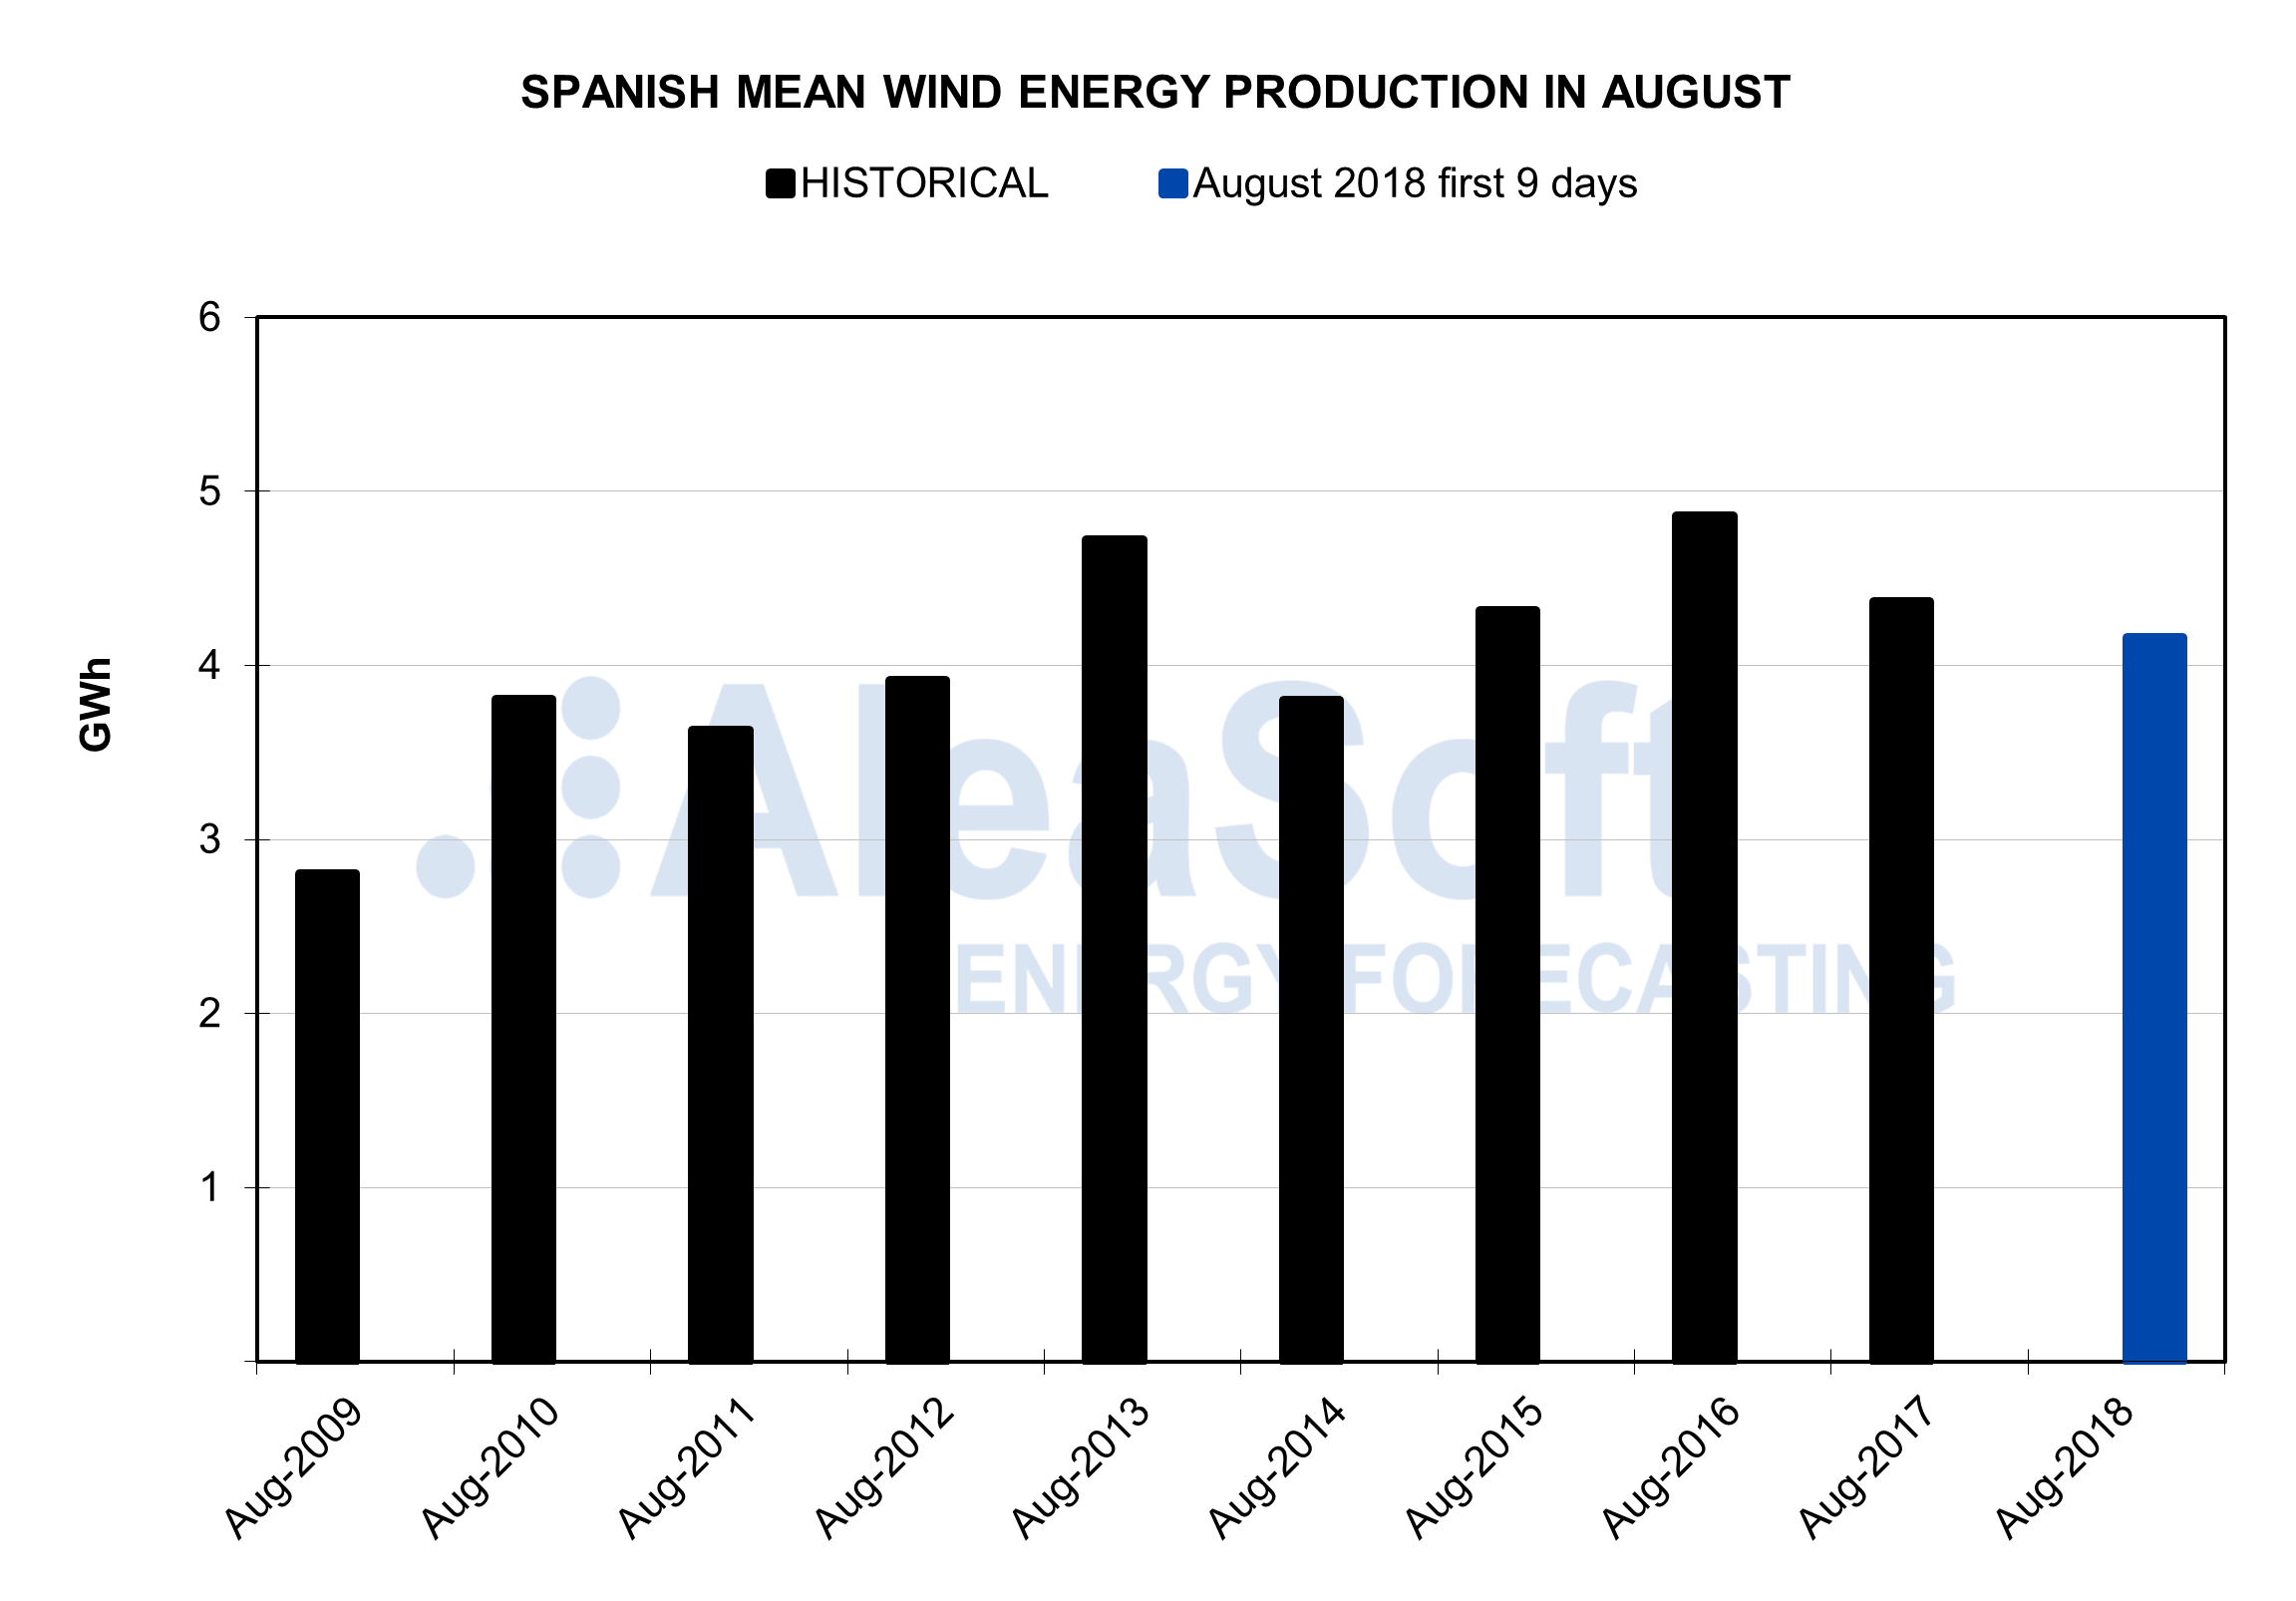 AleaSoft - Spanish mean wind energy production in August